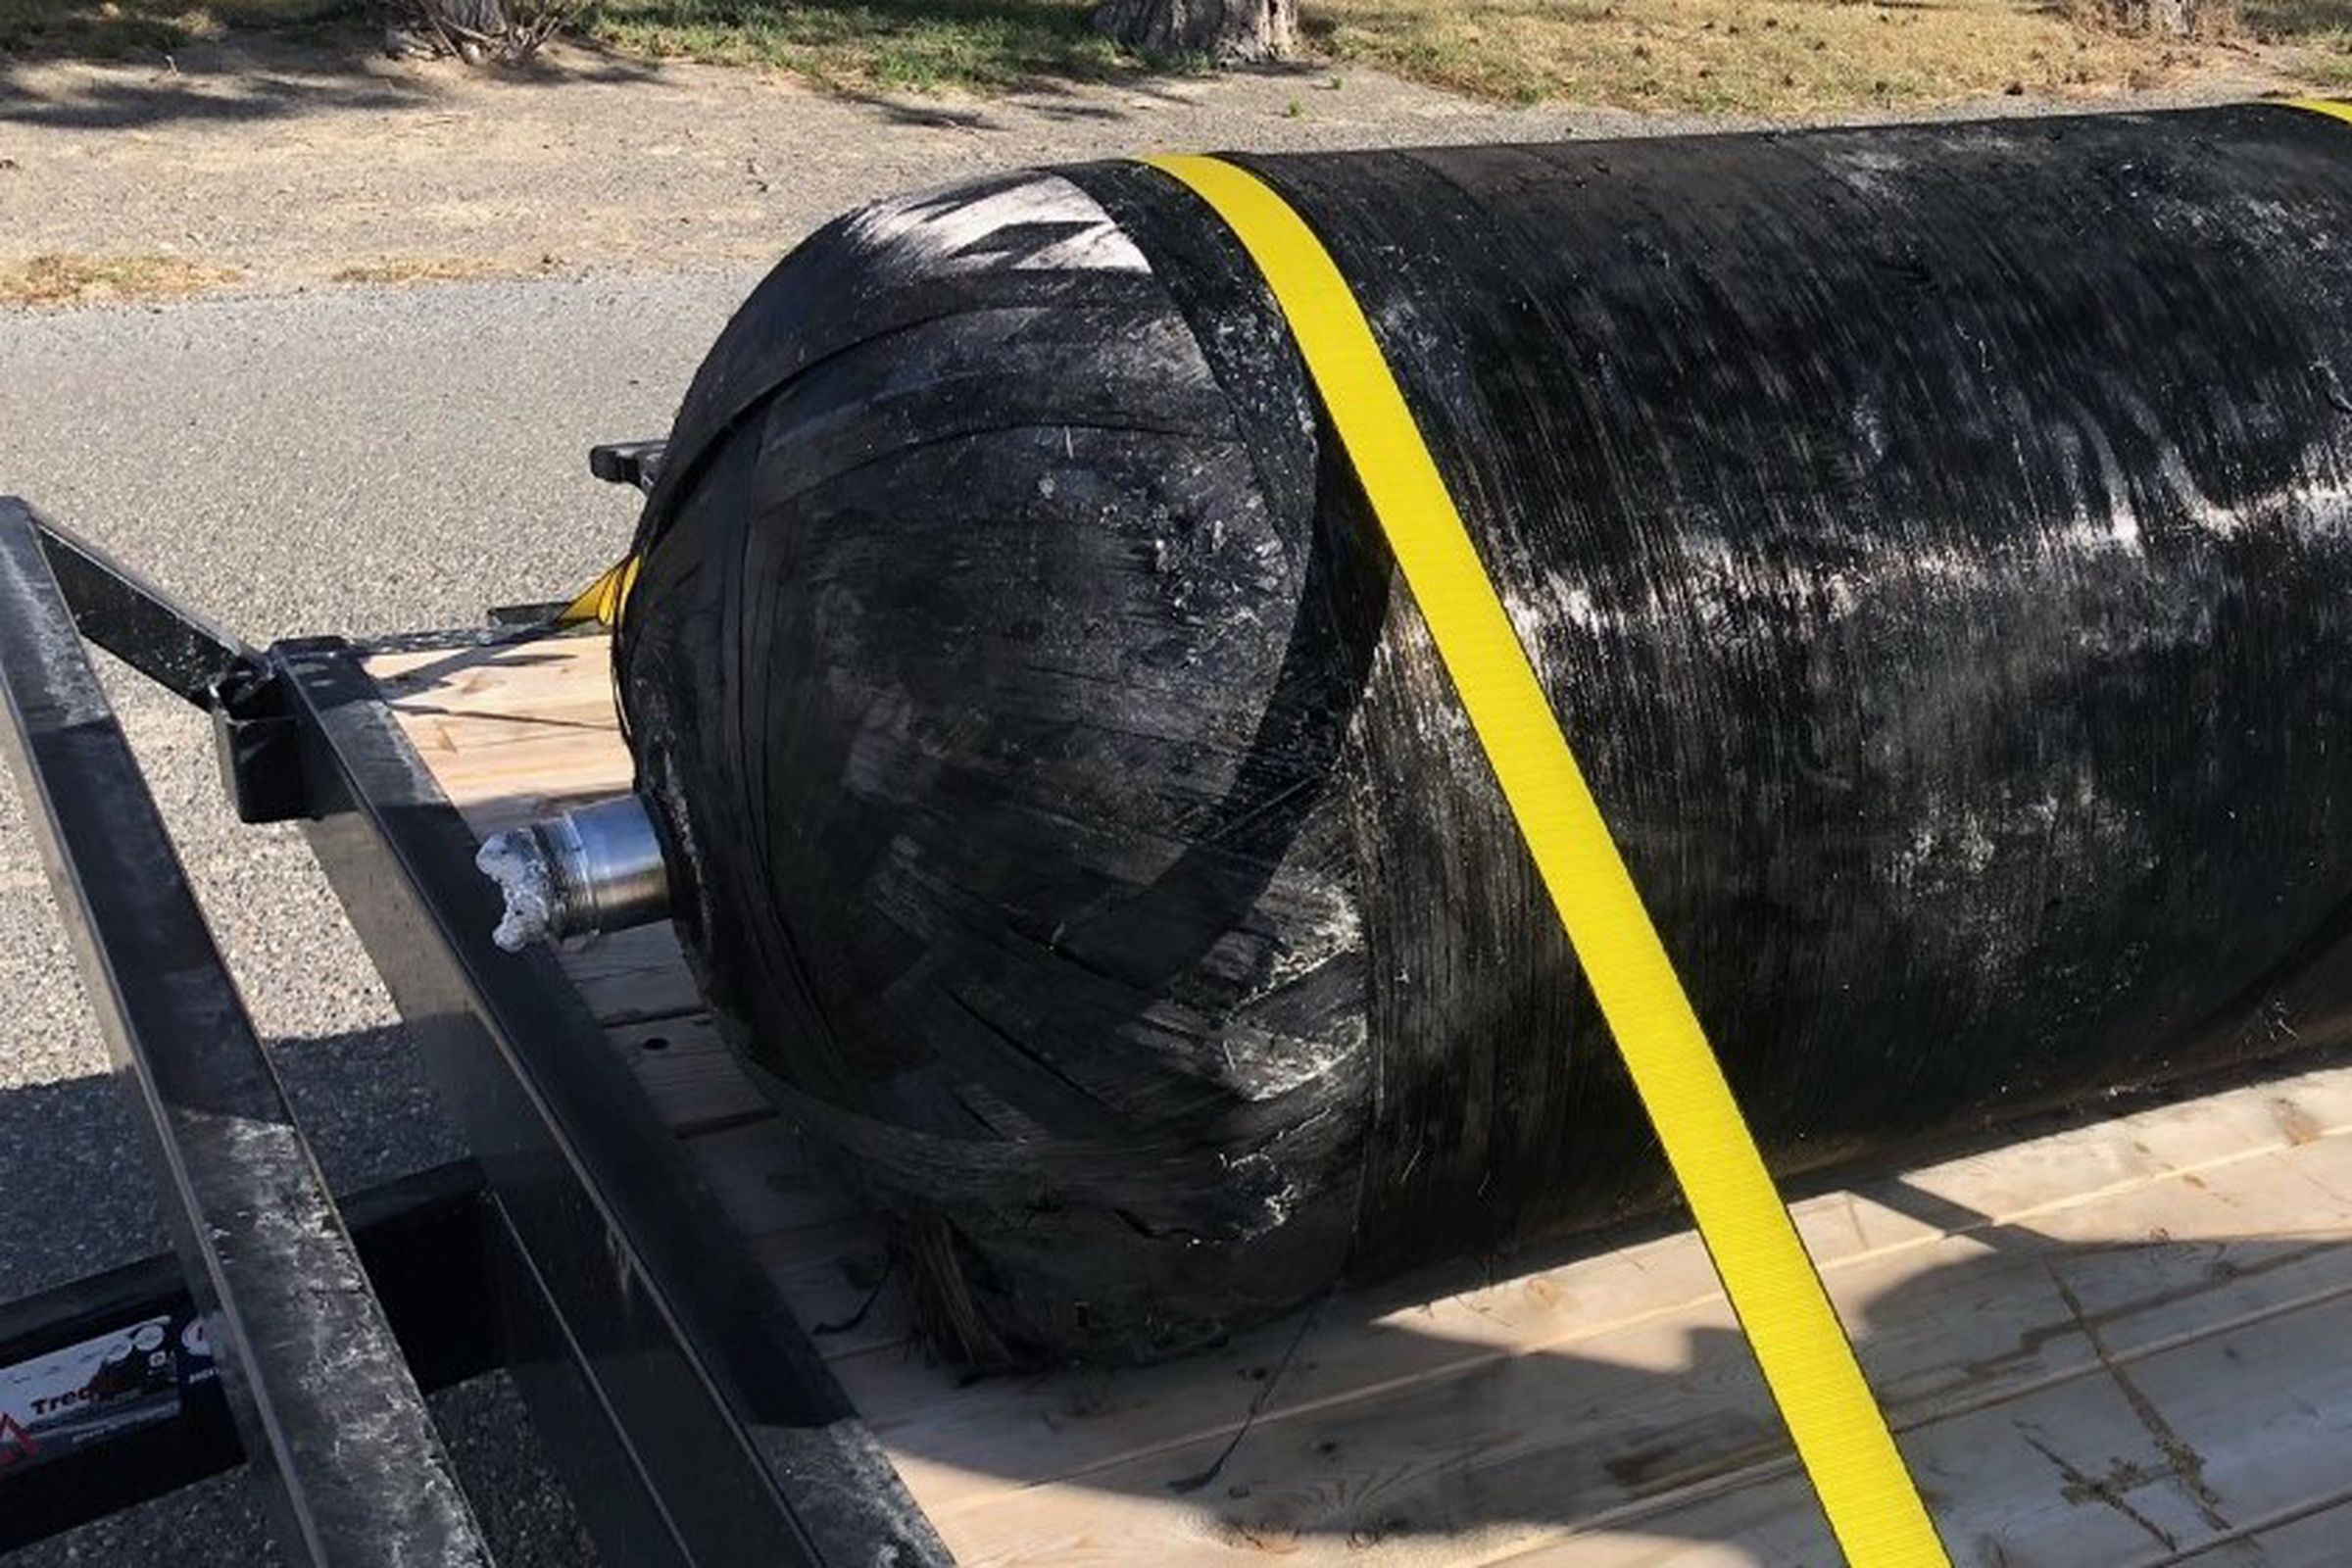 A pressure vessel from SpaceX’s Falcon 9 rocket was found in a man’s farm last weekend.